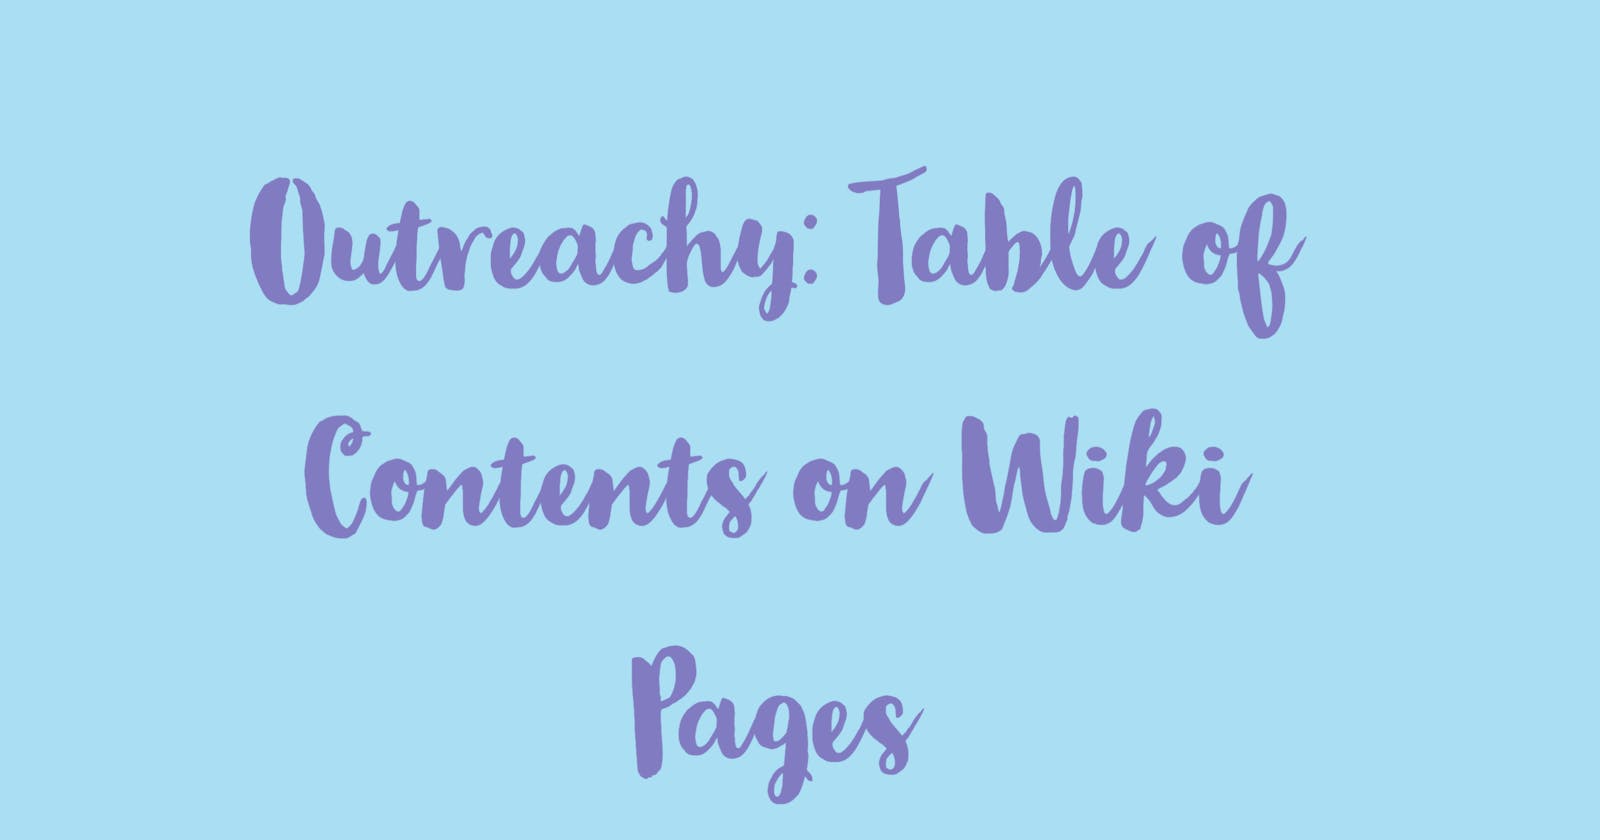 Outreachy: Table of Contents on Wiki Pages